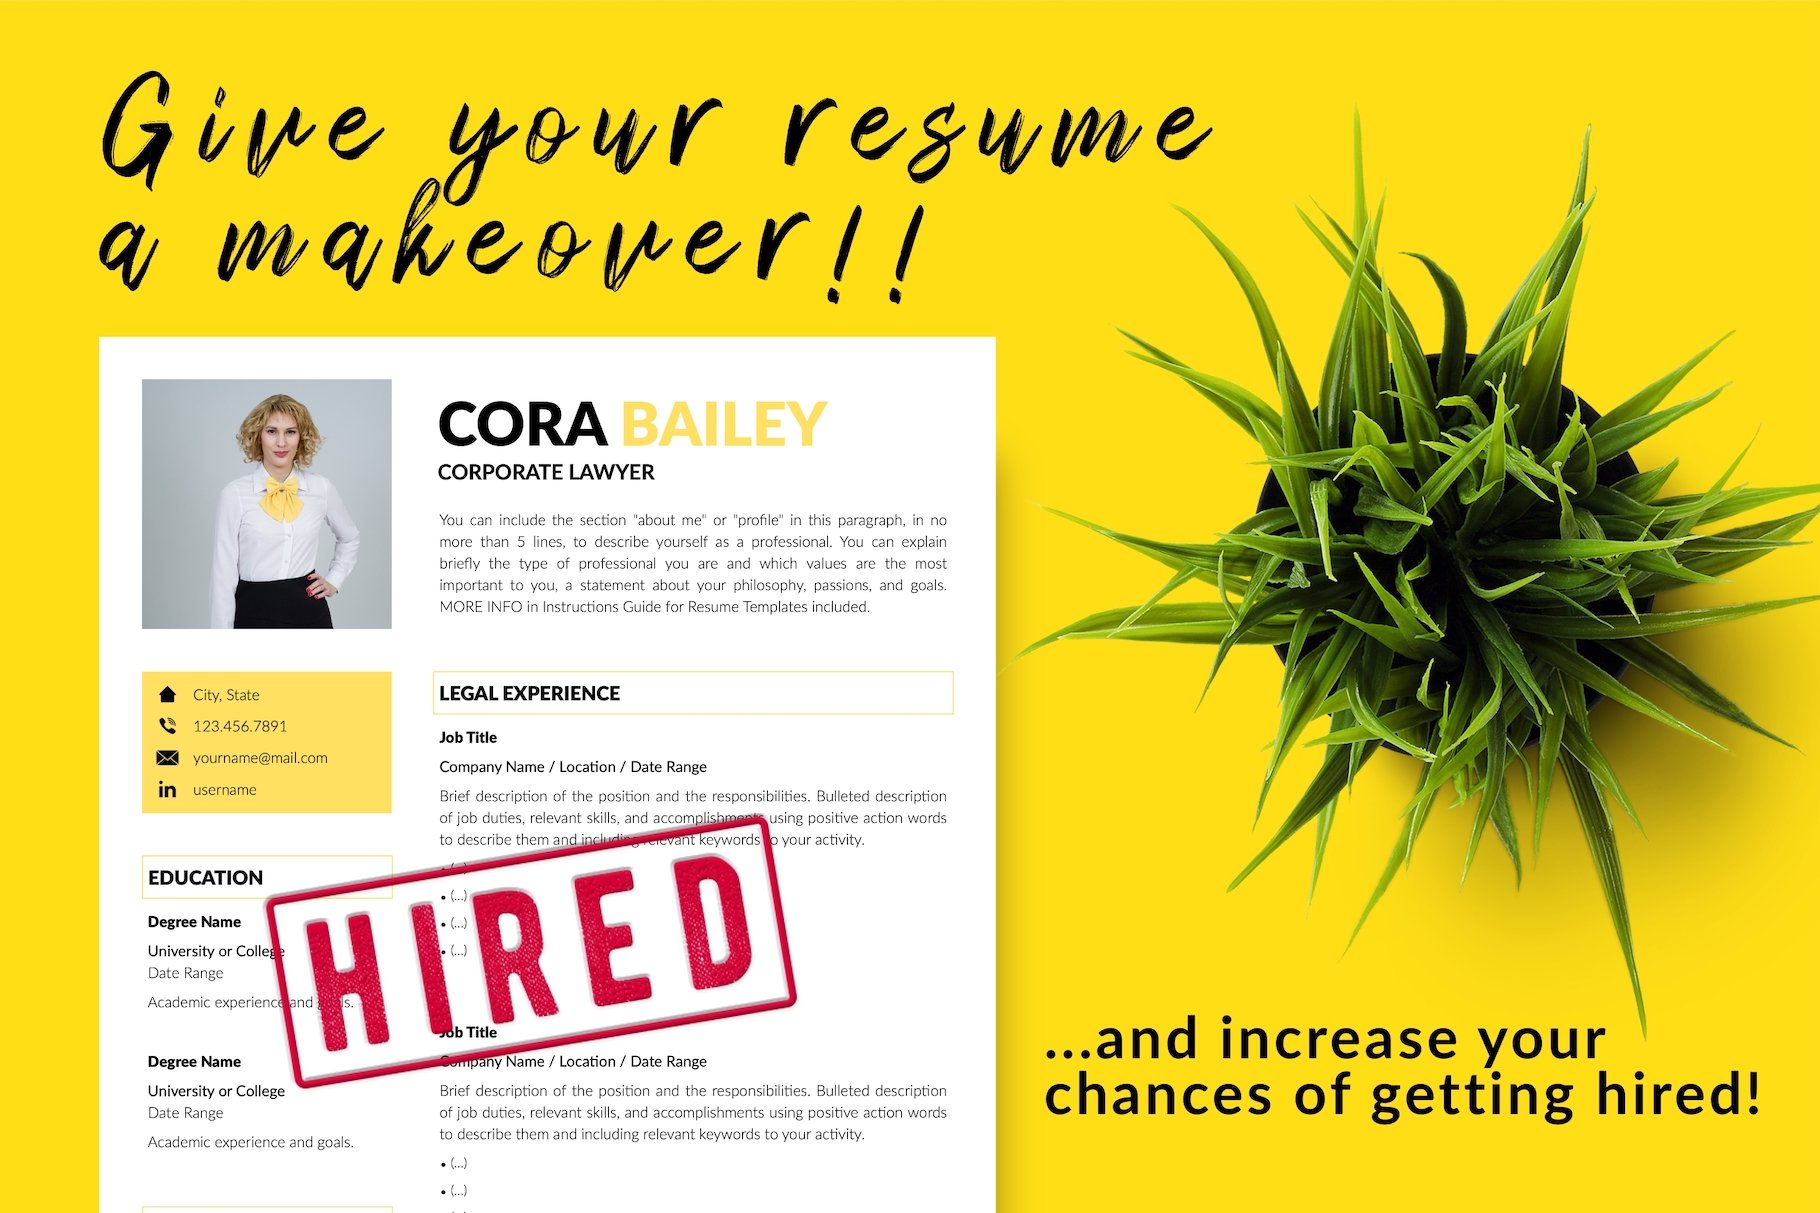 resume cv template cora bailey for creative market 16 give your resume a makeover 779